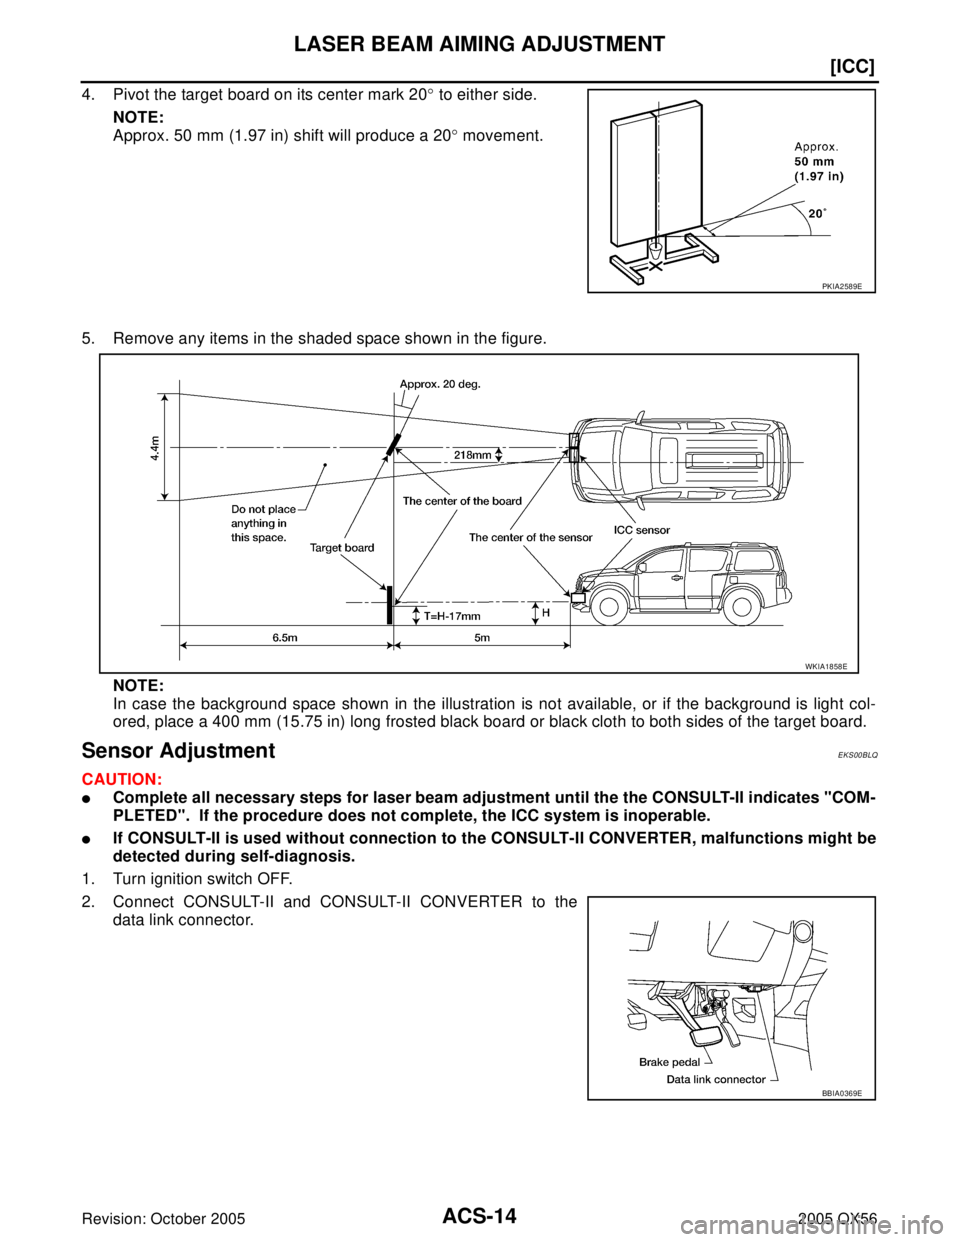 INFINITI QX4 2005  Factory Service Manual ACS-14
[ICC]
LASER BEAM AIMING ADJUSTMENT
Revision: October 20052005 QX56
4. Pivot the target board on its center mark 20° to either side.
NOTE:
Approx. 50 mm (1.97 in) shift will produce a 20° move